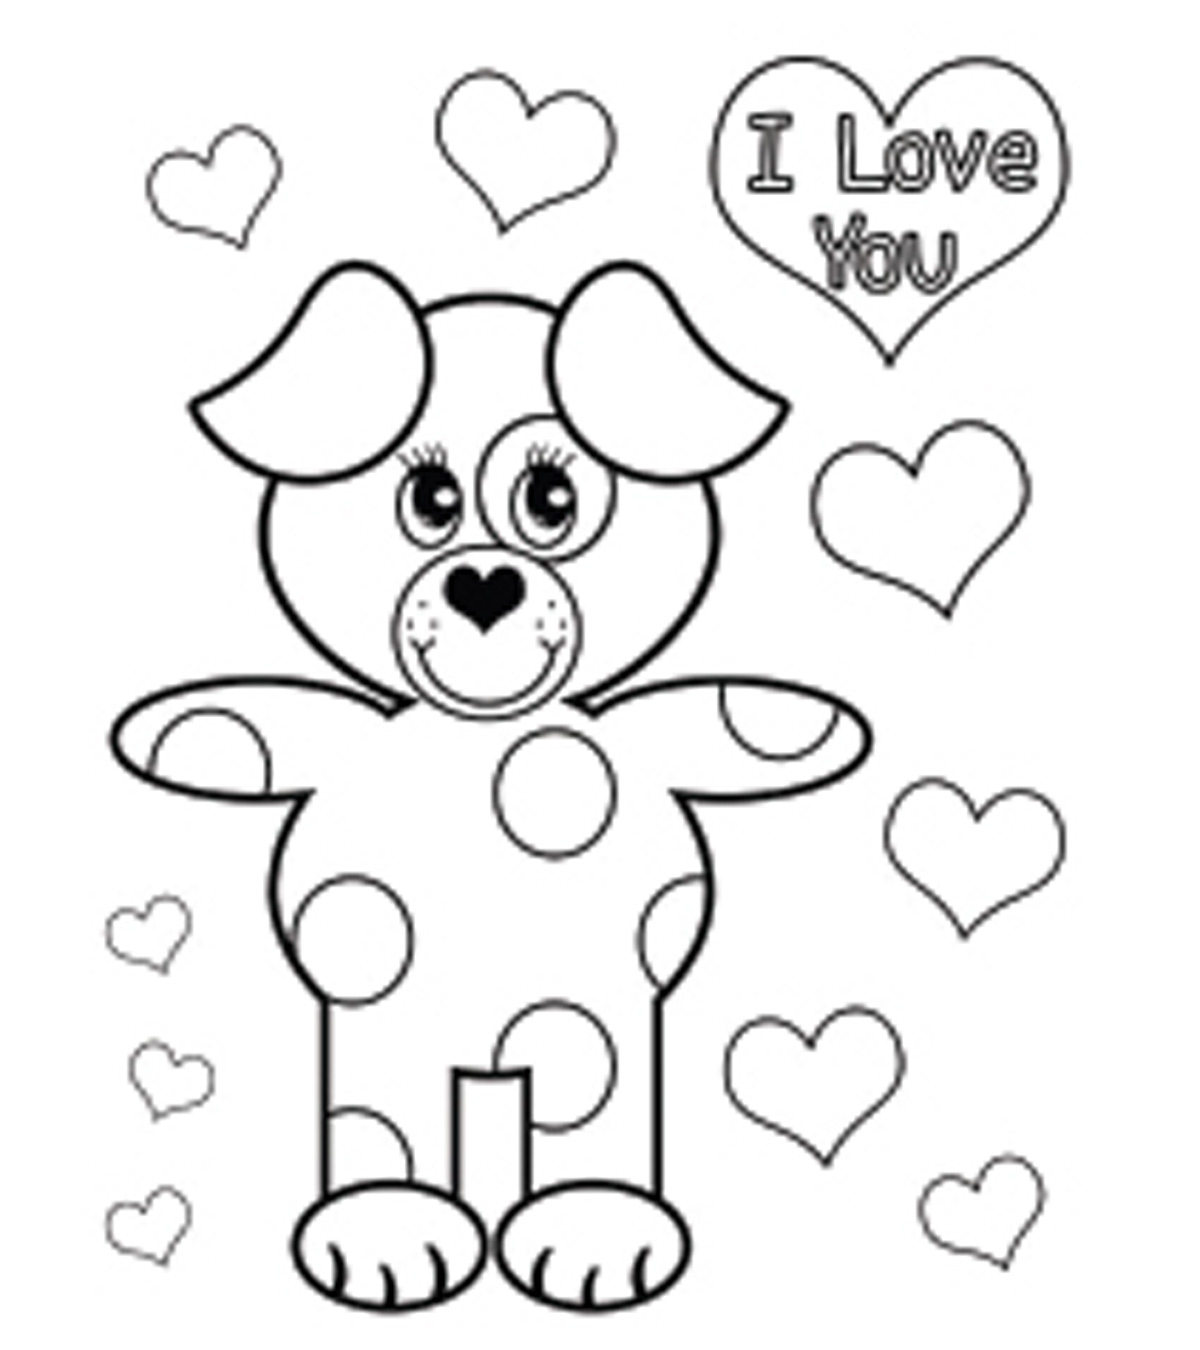 Top 44 Valentine’s Day Coloring Pages For Your Little Ones_image